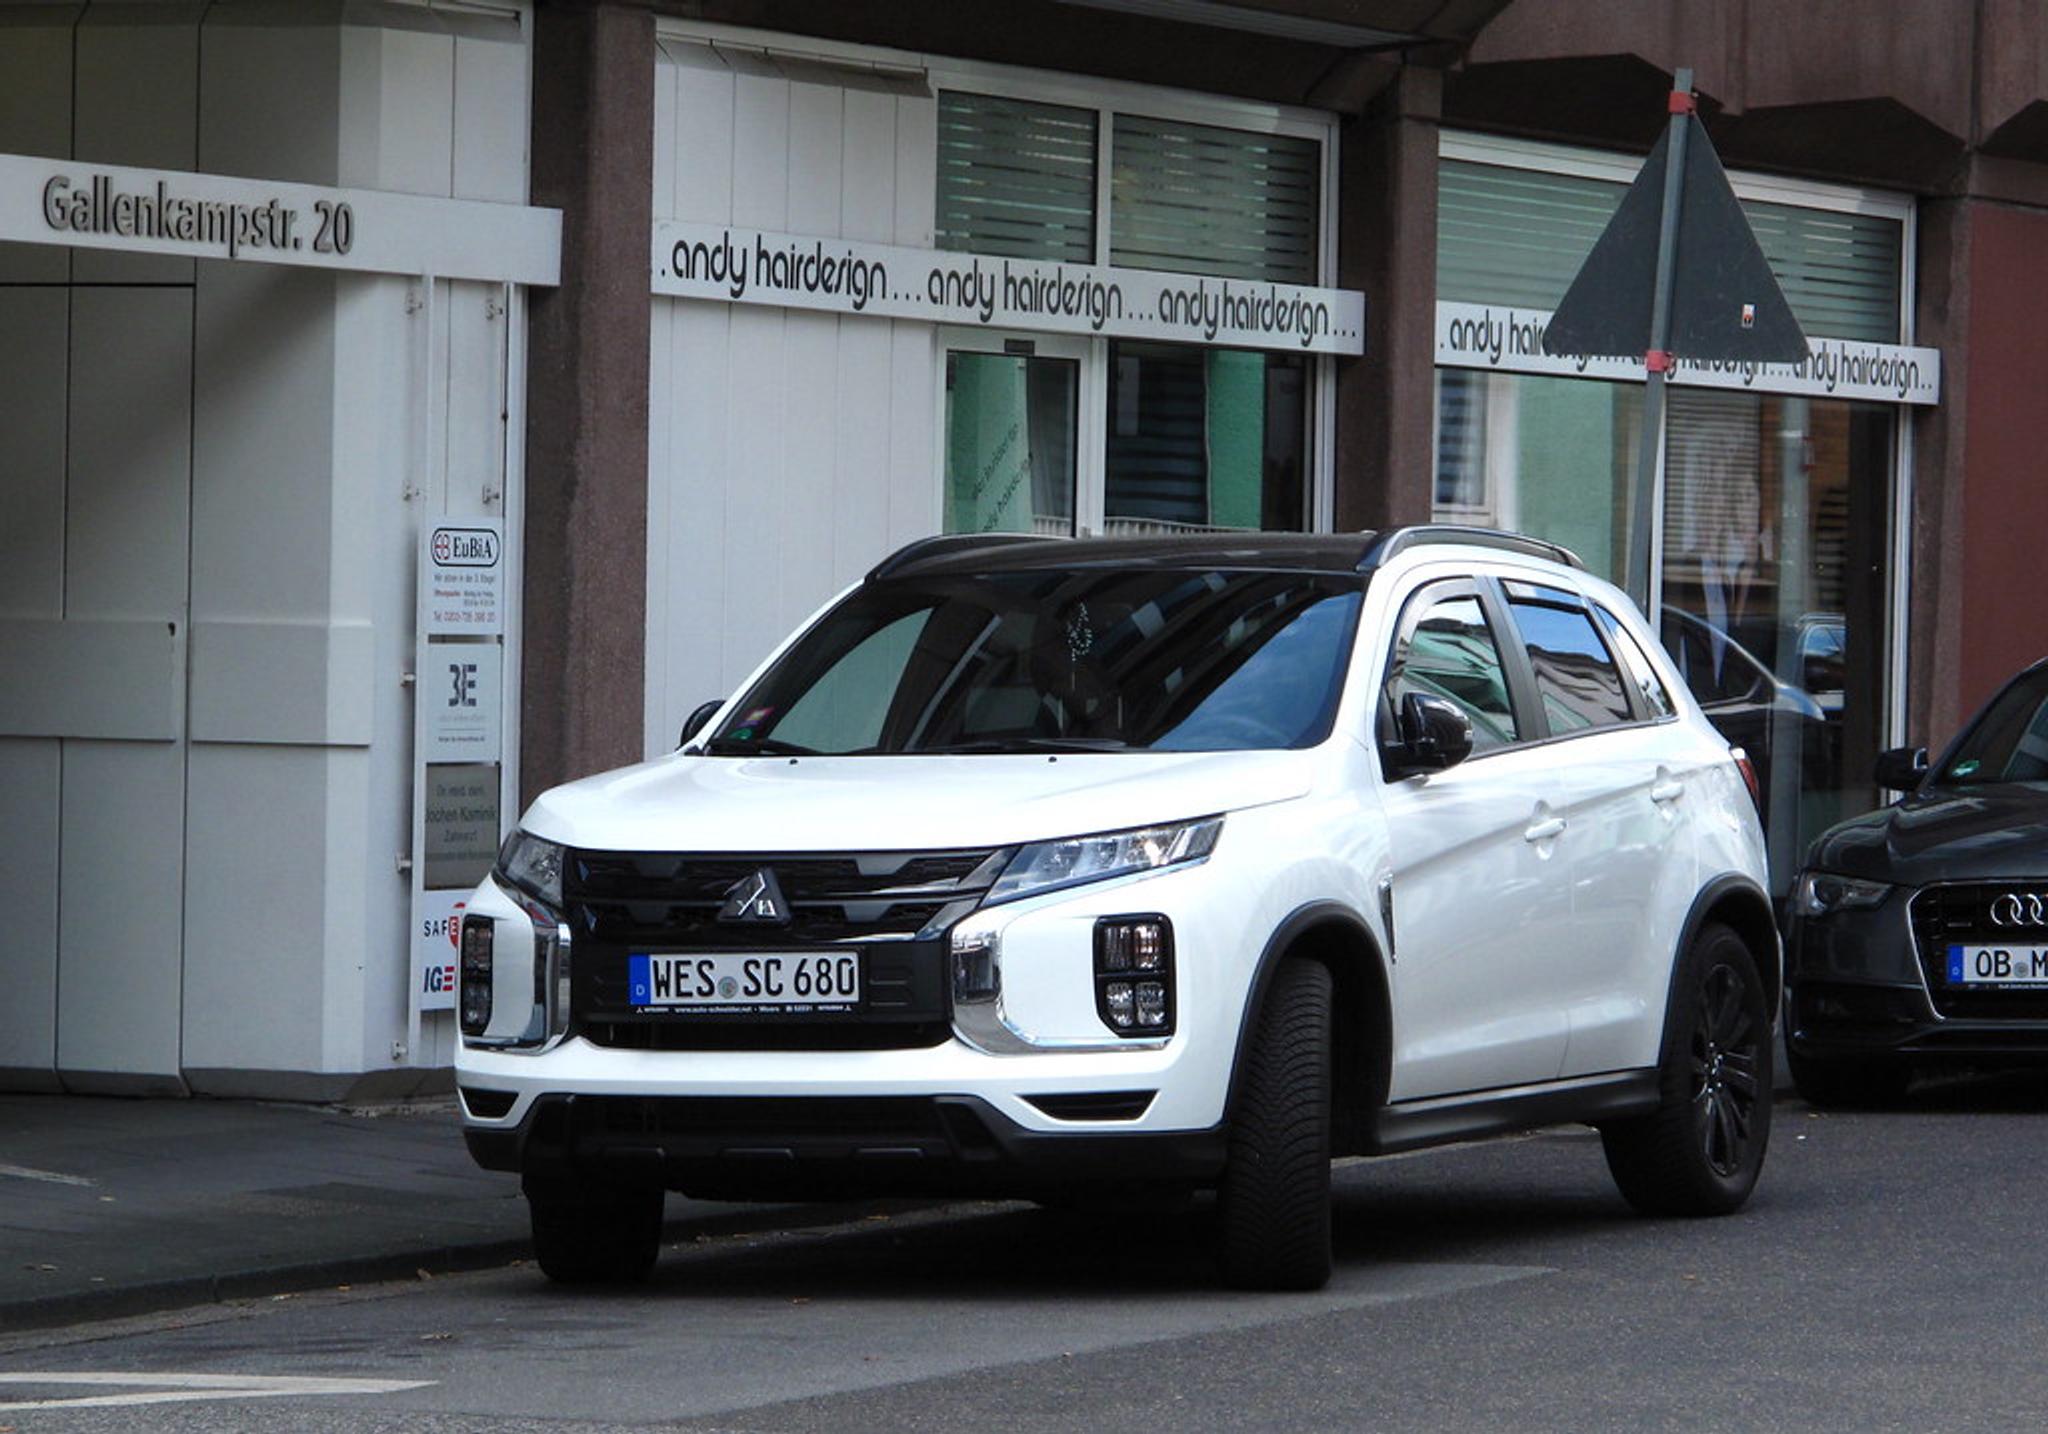 White Mitsubishi Outlander Sport (ASX) parked by the side of the road